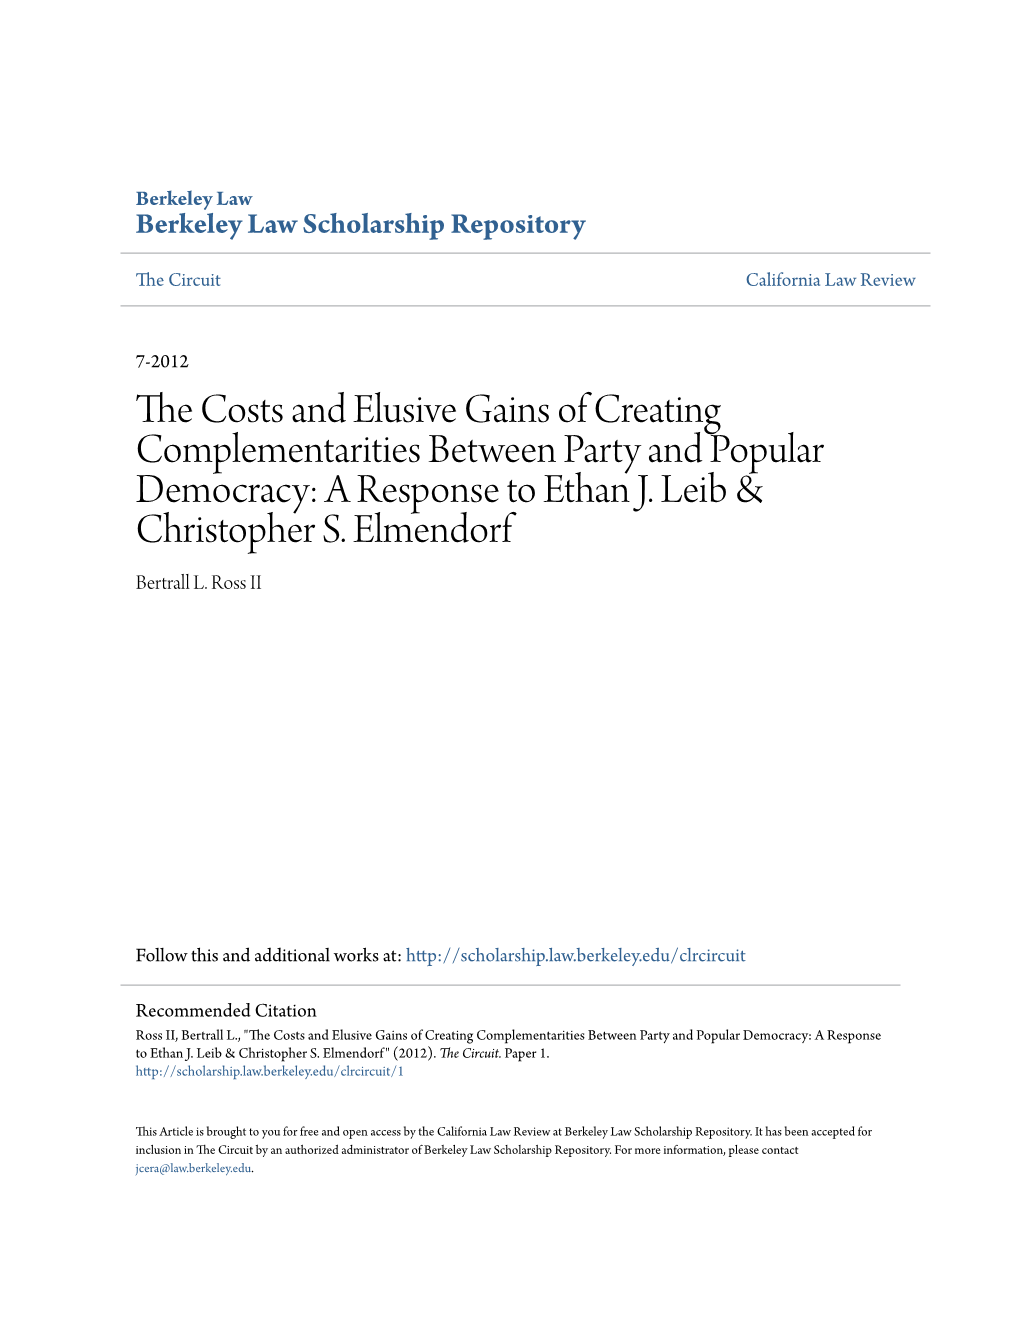 The Costs and Elusive Gains of Creating Complementarities Between Party and Popular Democracy: a Response to Ethan J